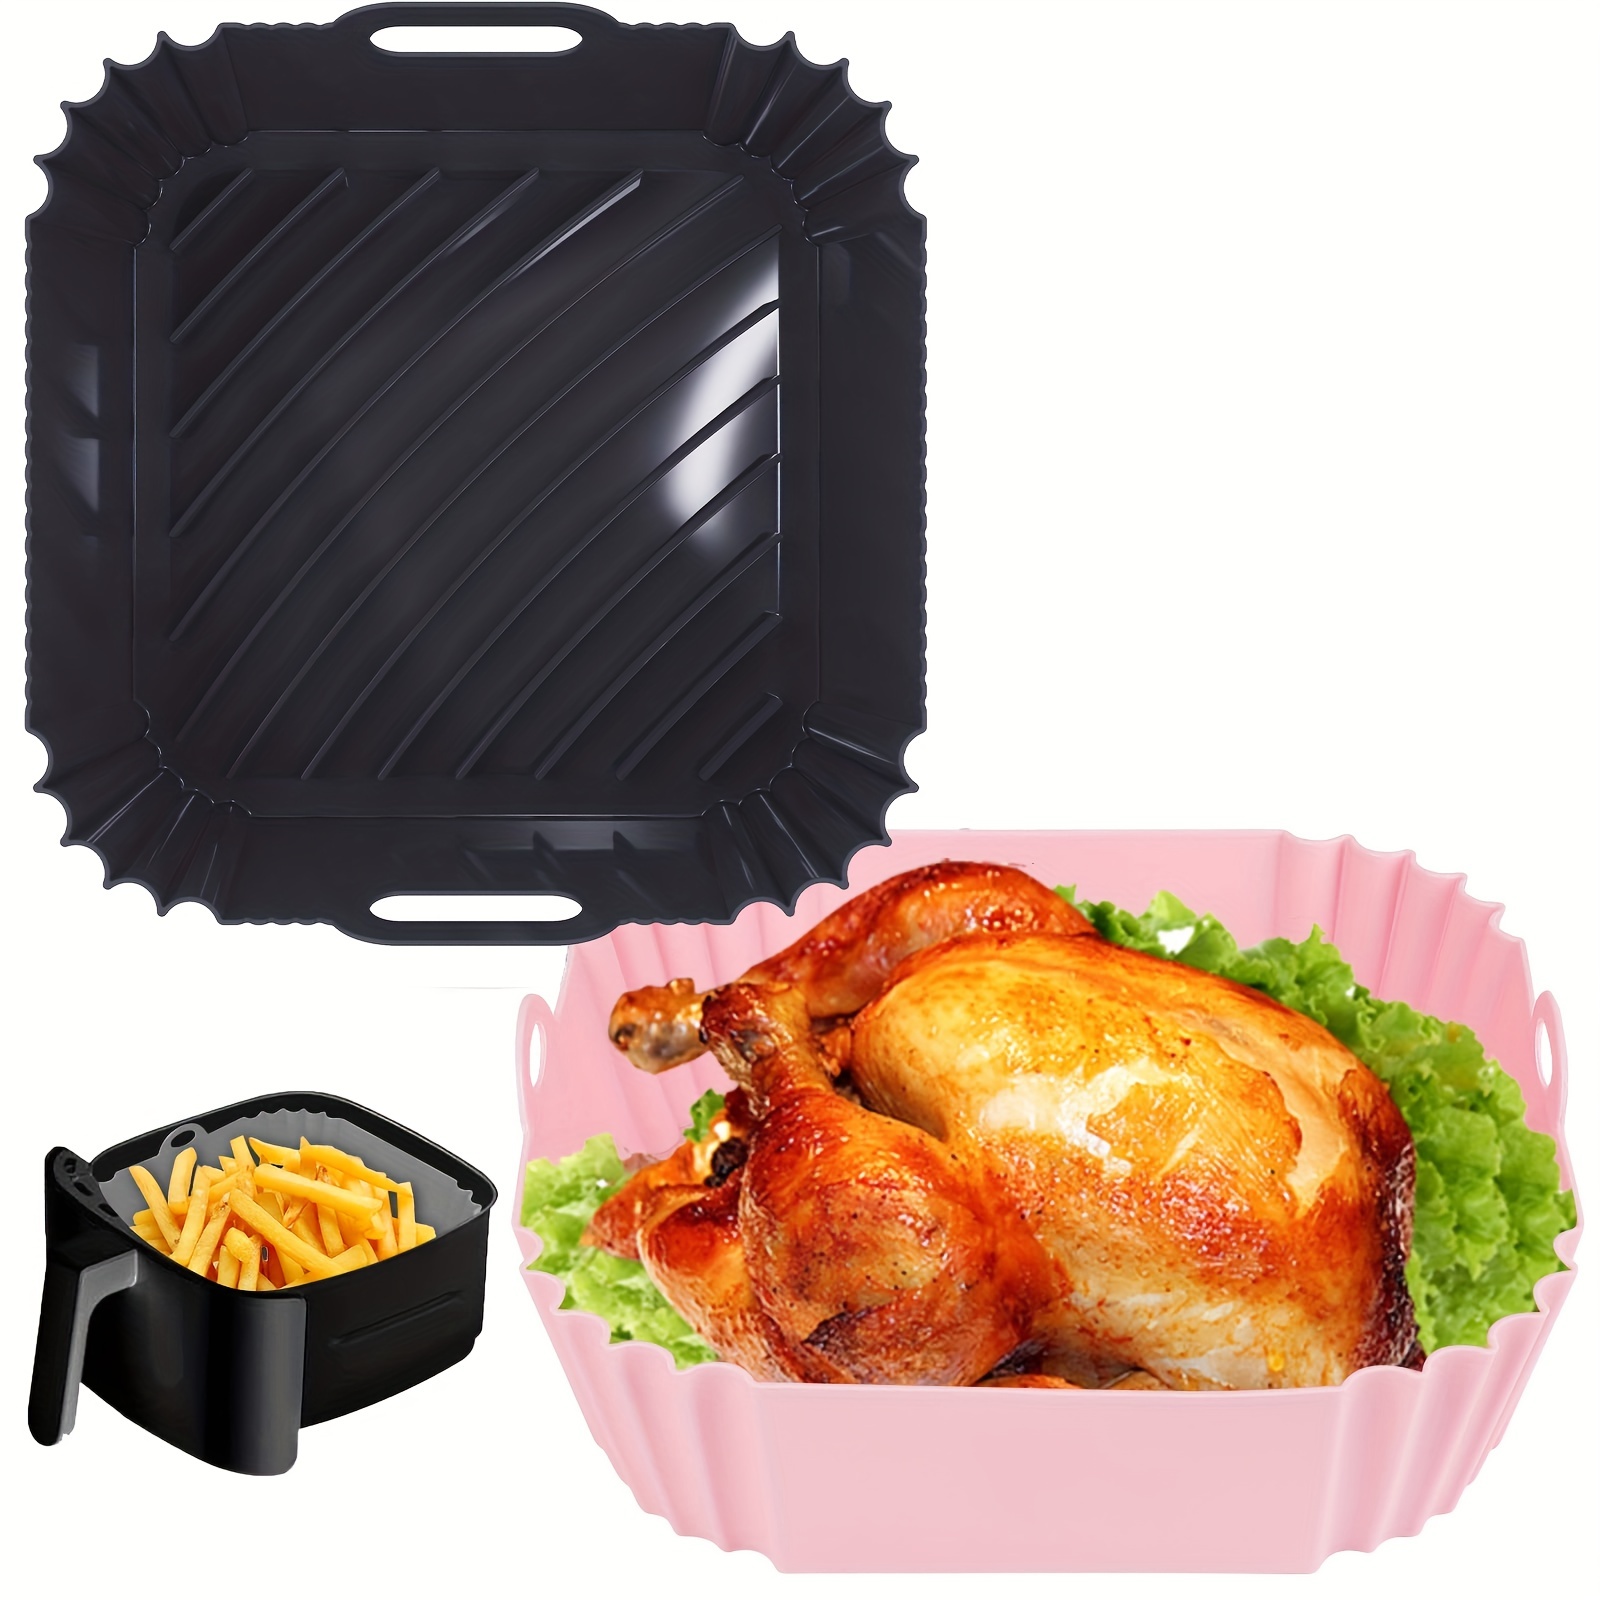 food grade silicone air fryer pot with mitts reusable and easy to clean basket liner for healthier cooking